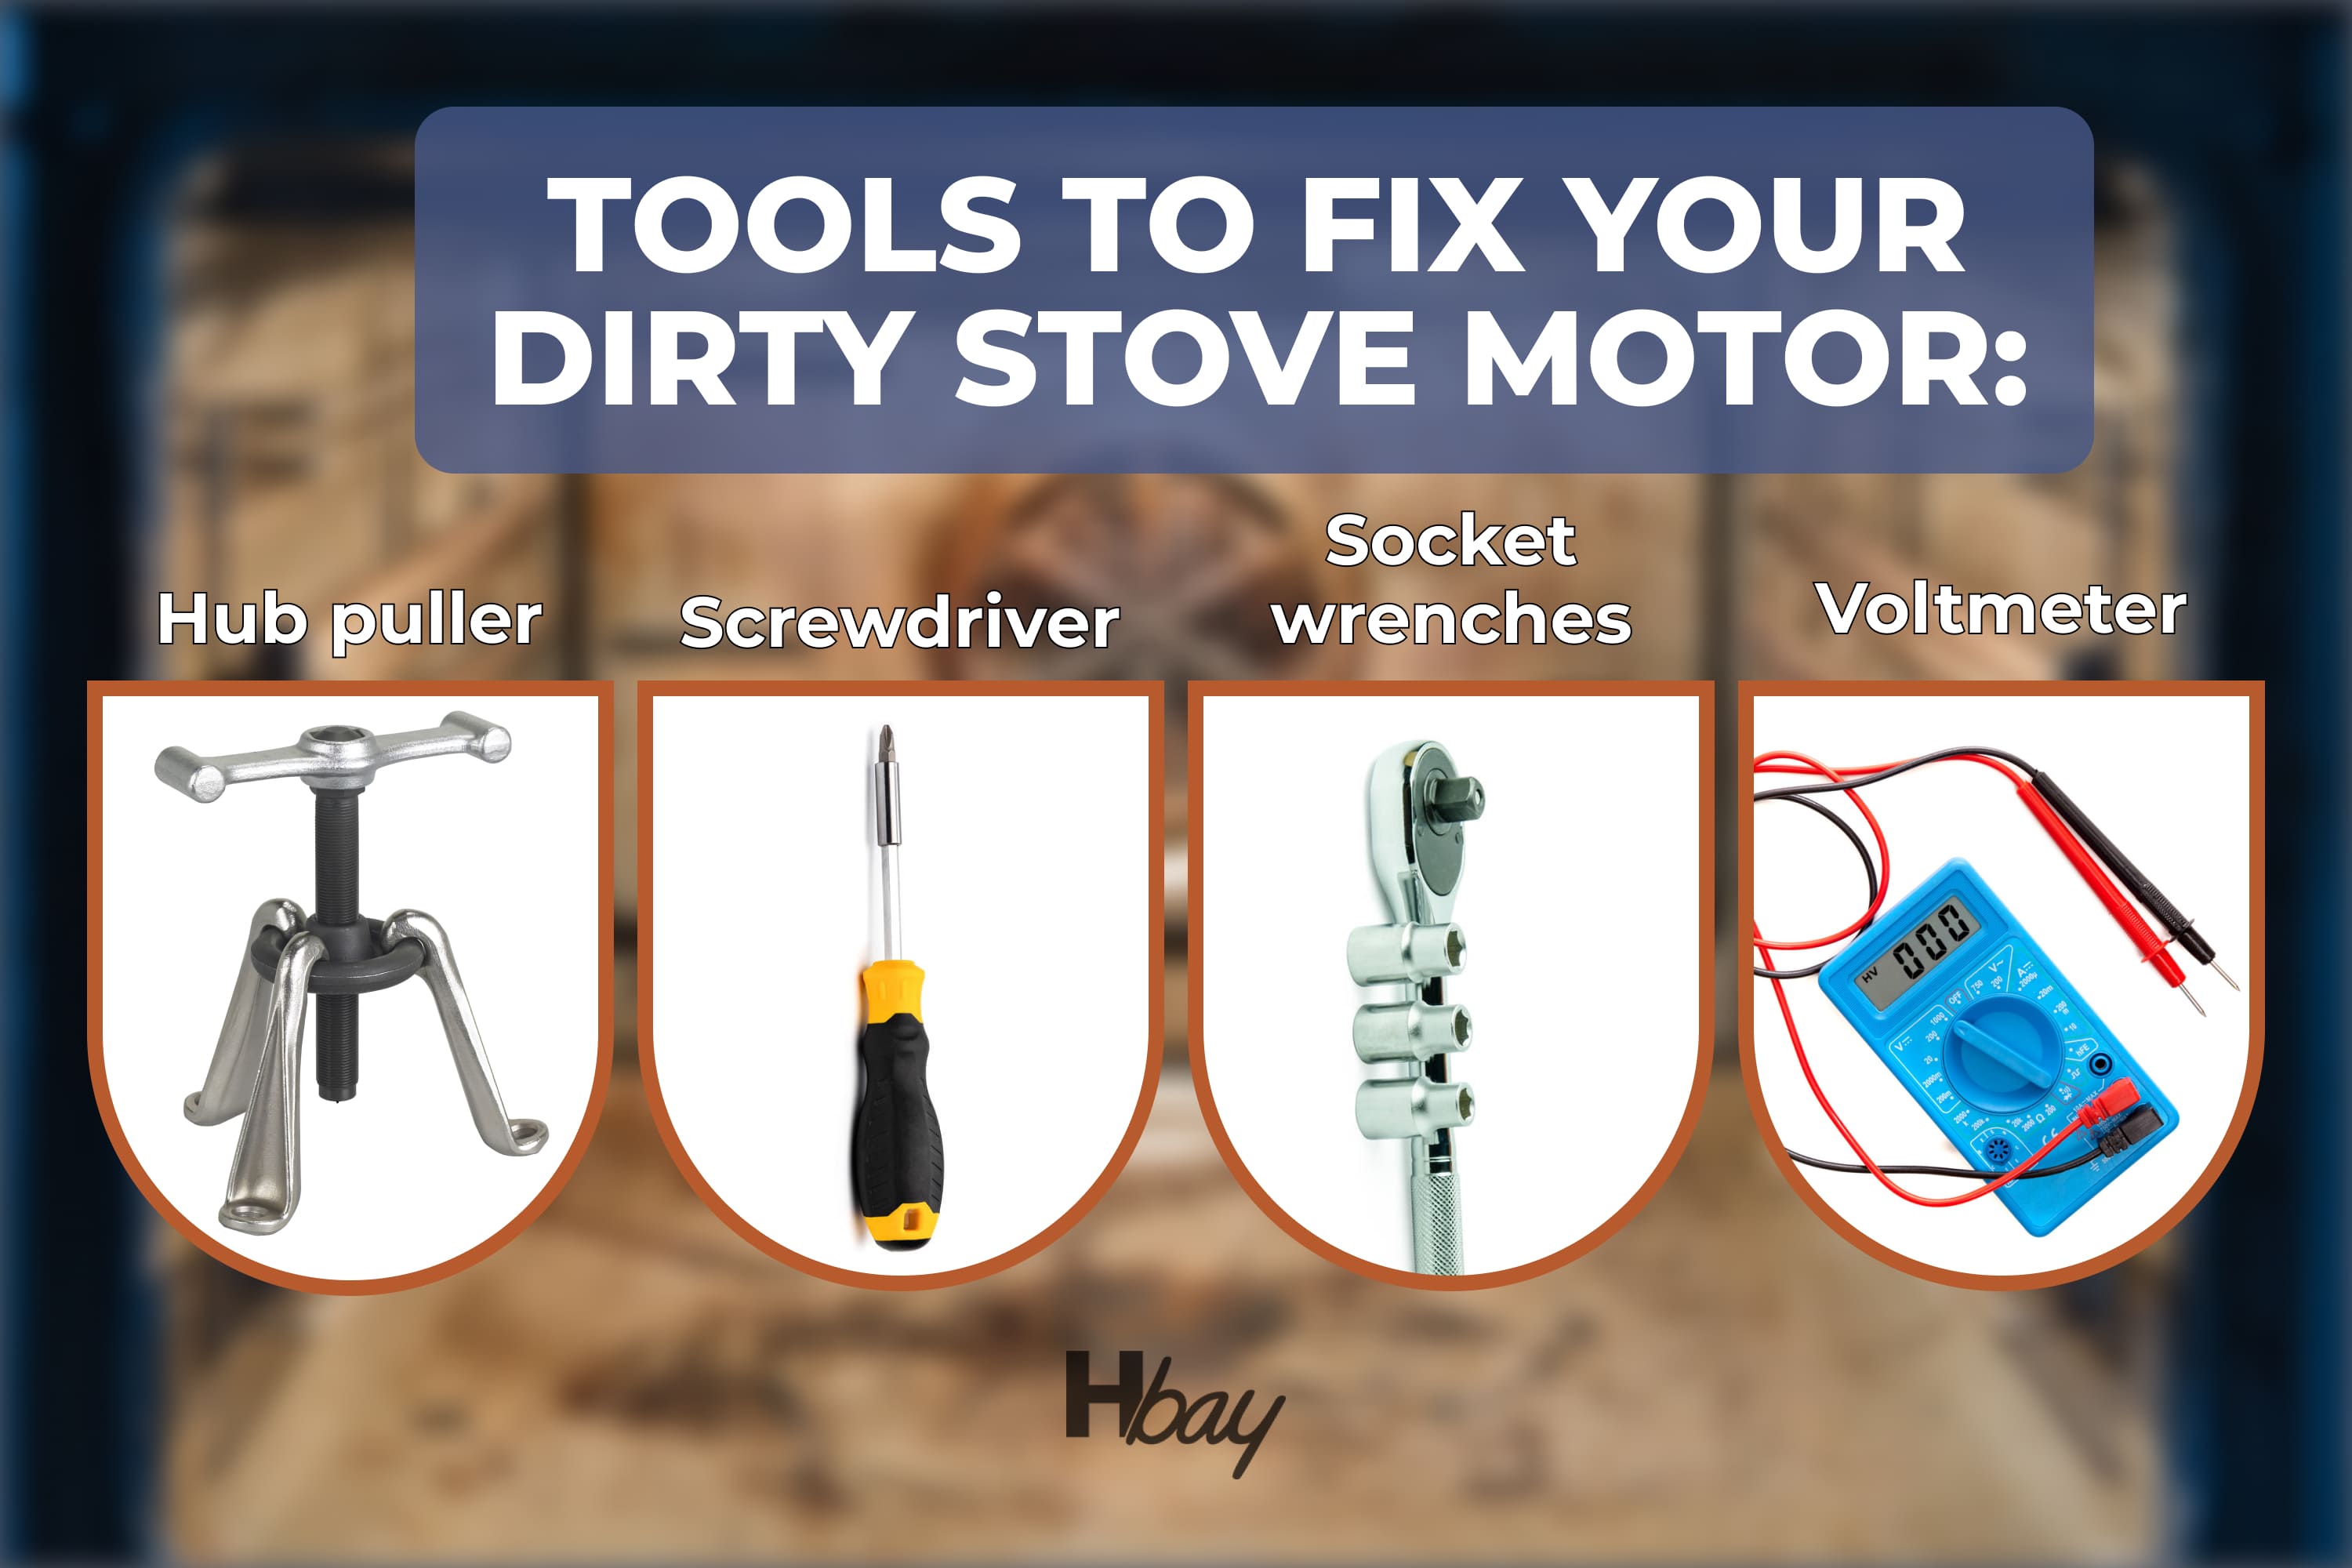 Tools to fix your dirty stove motor